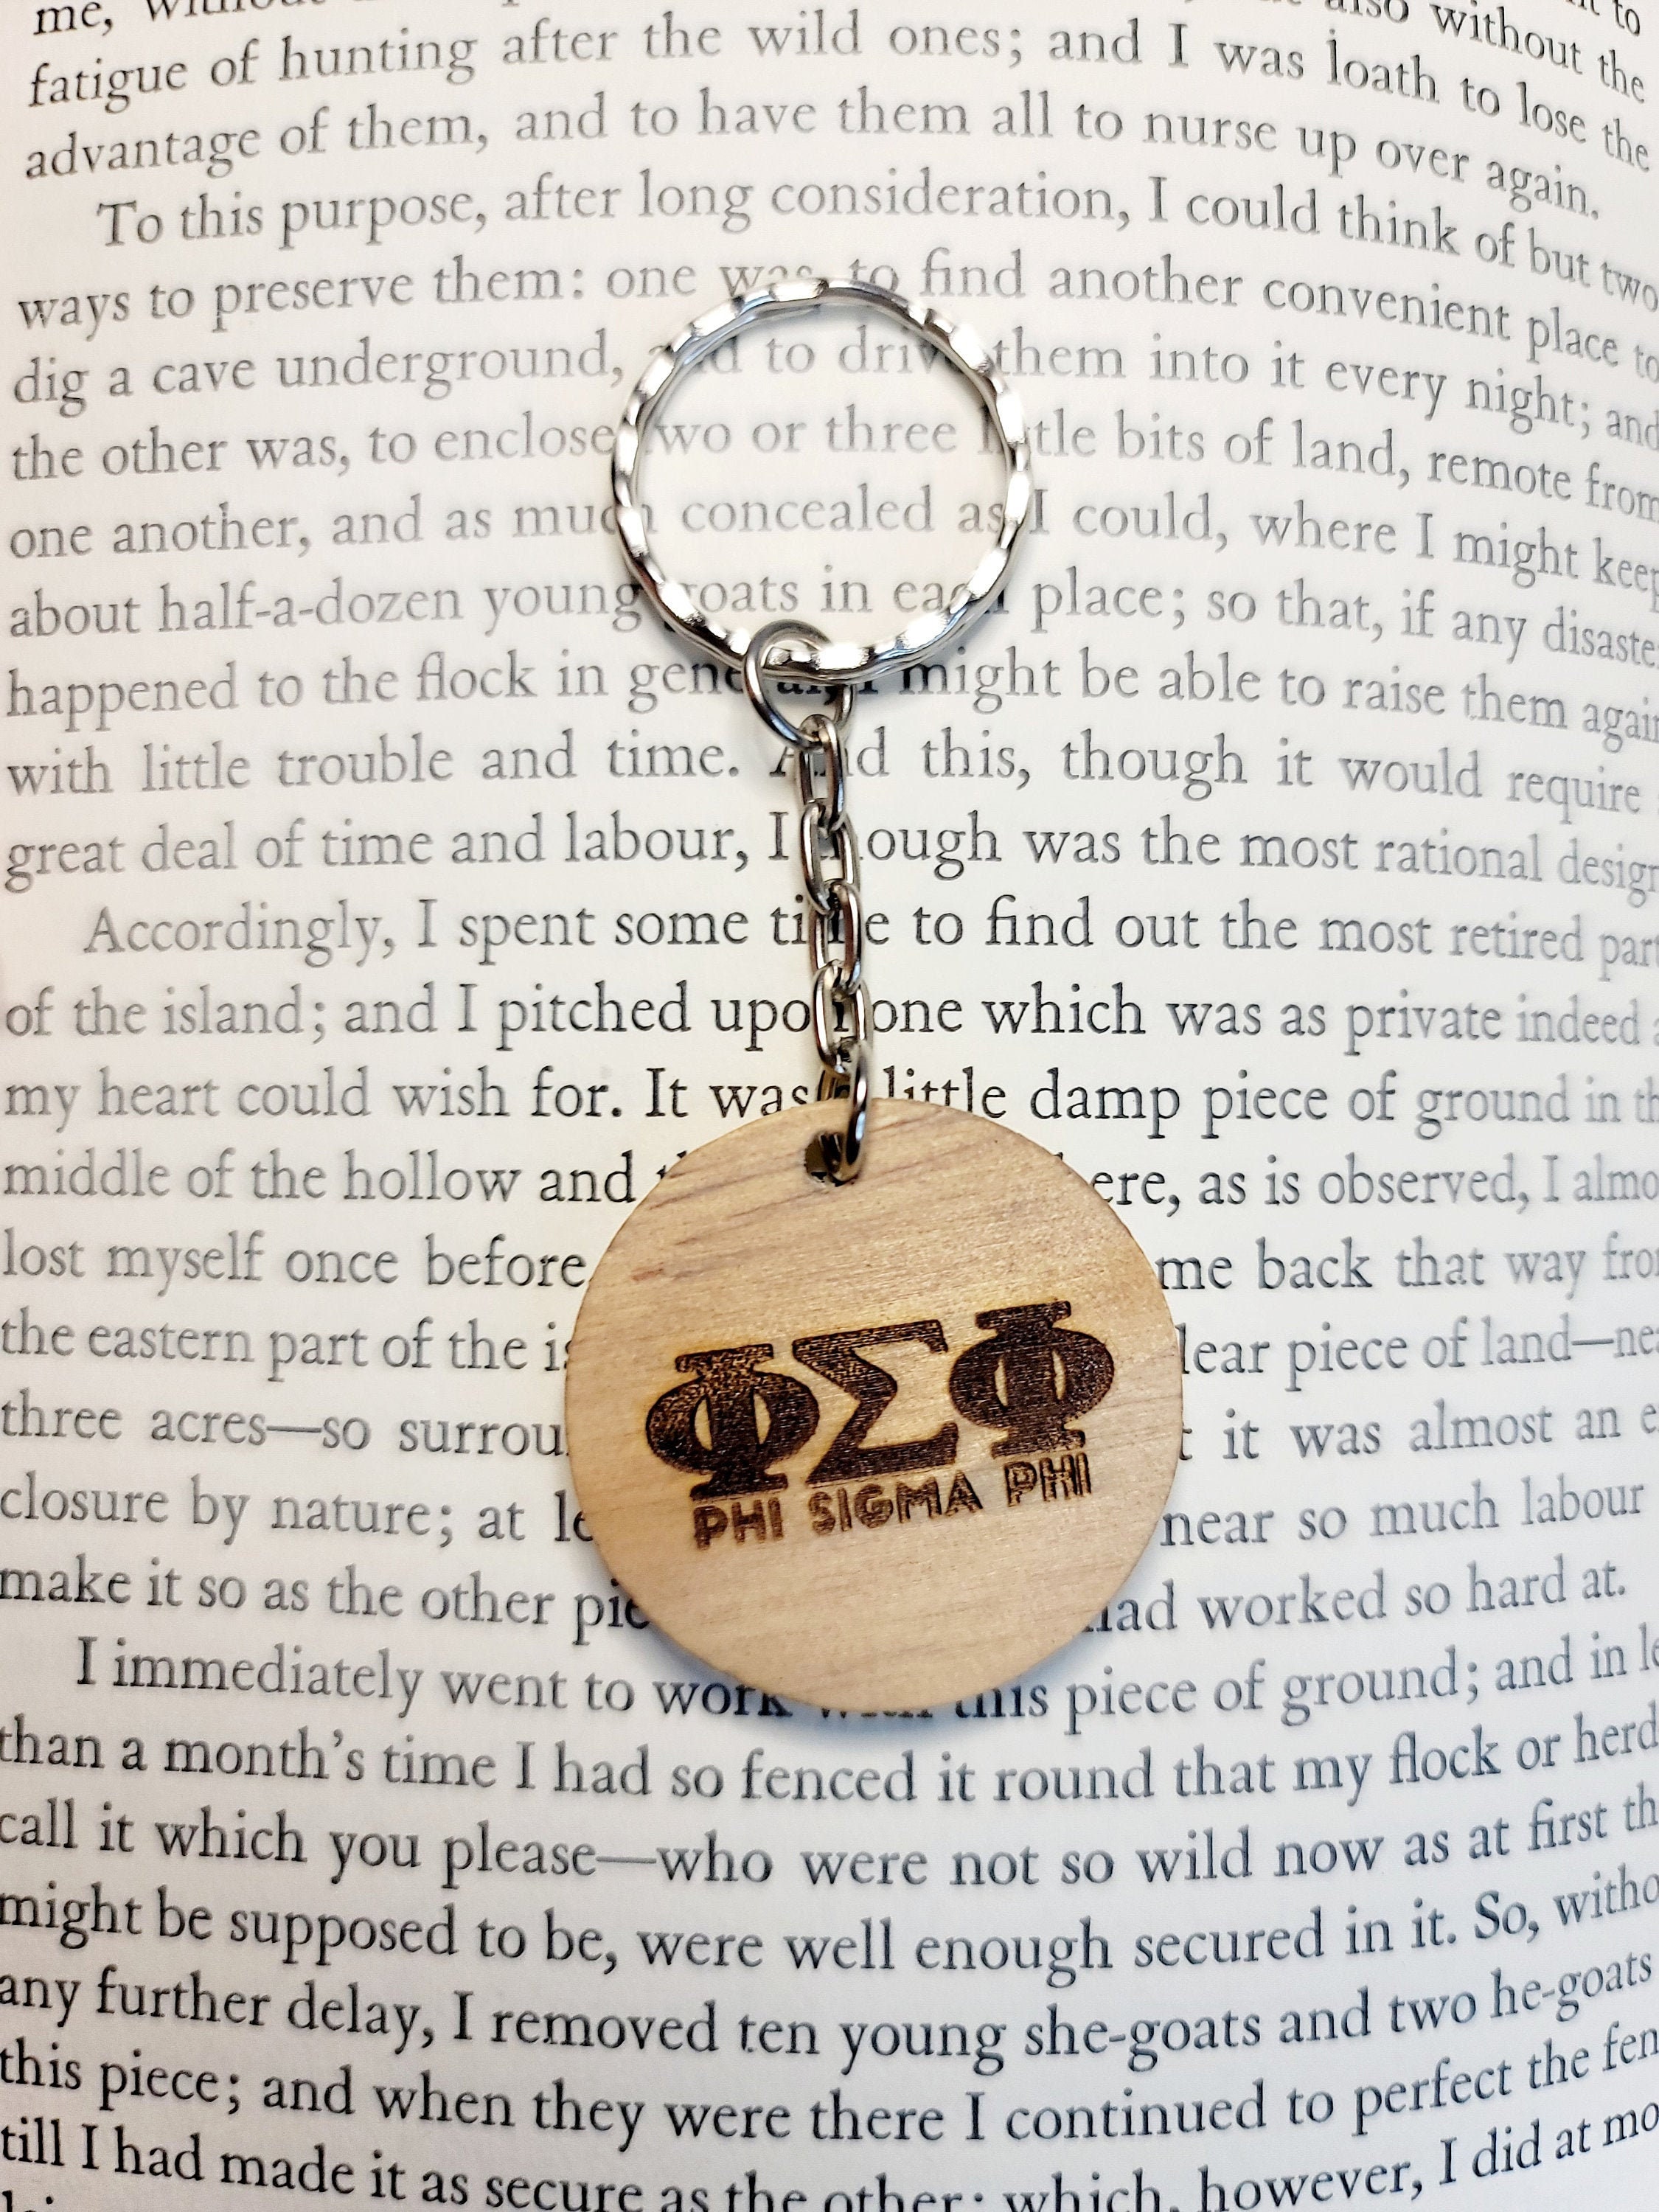 Chi Phi Bottle & Can Opener Key Chain - Melissa's Custom Gifts